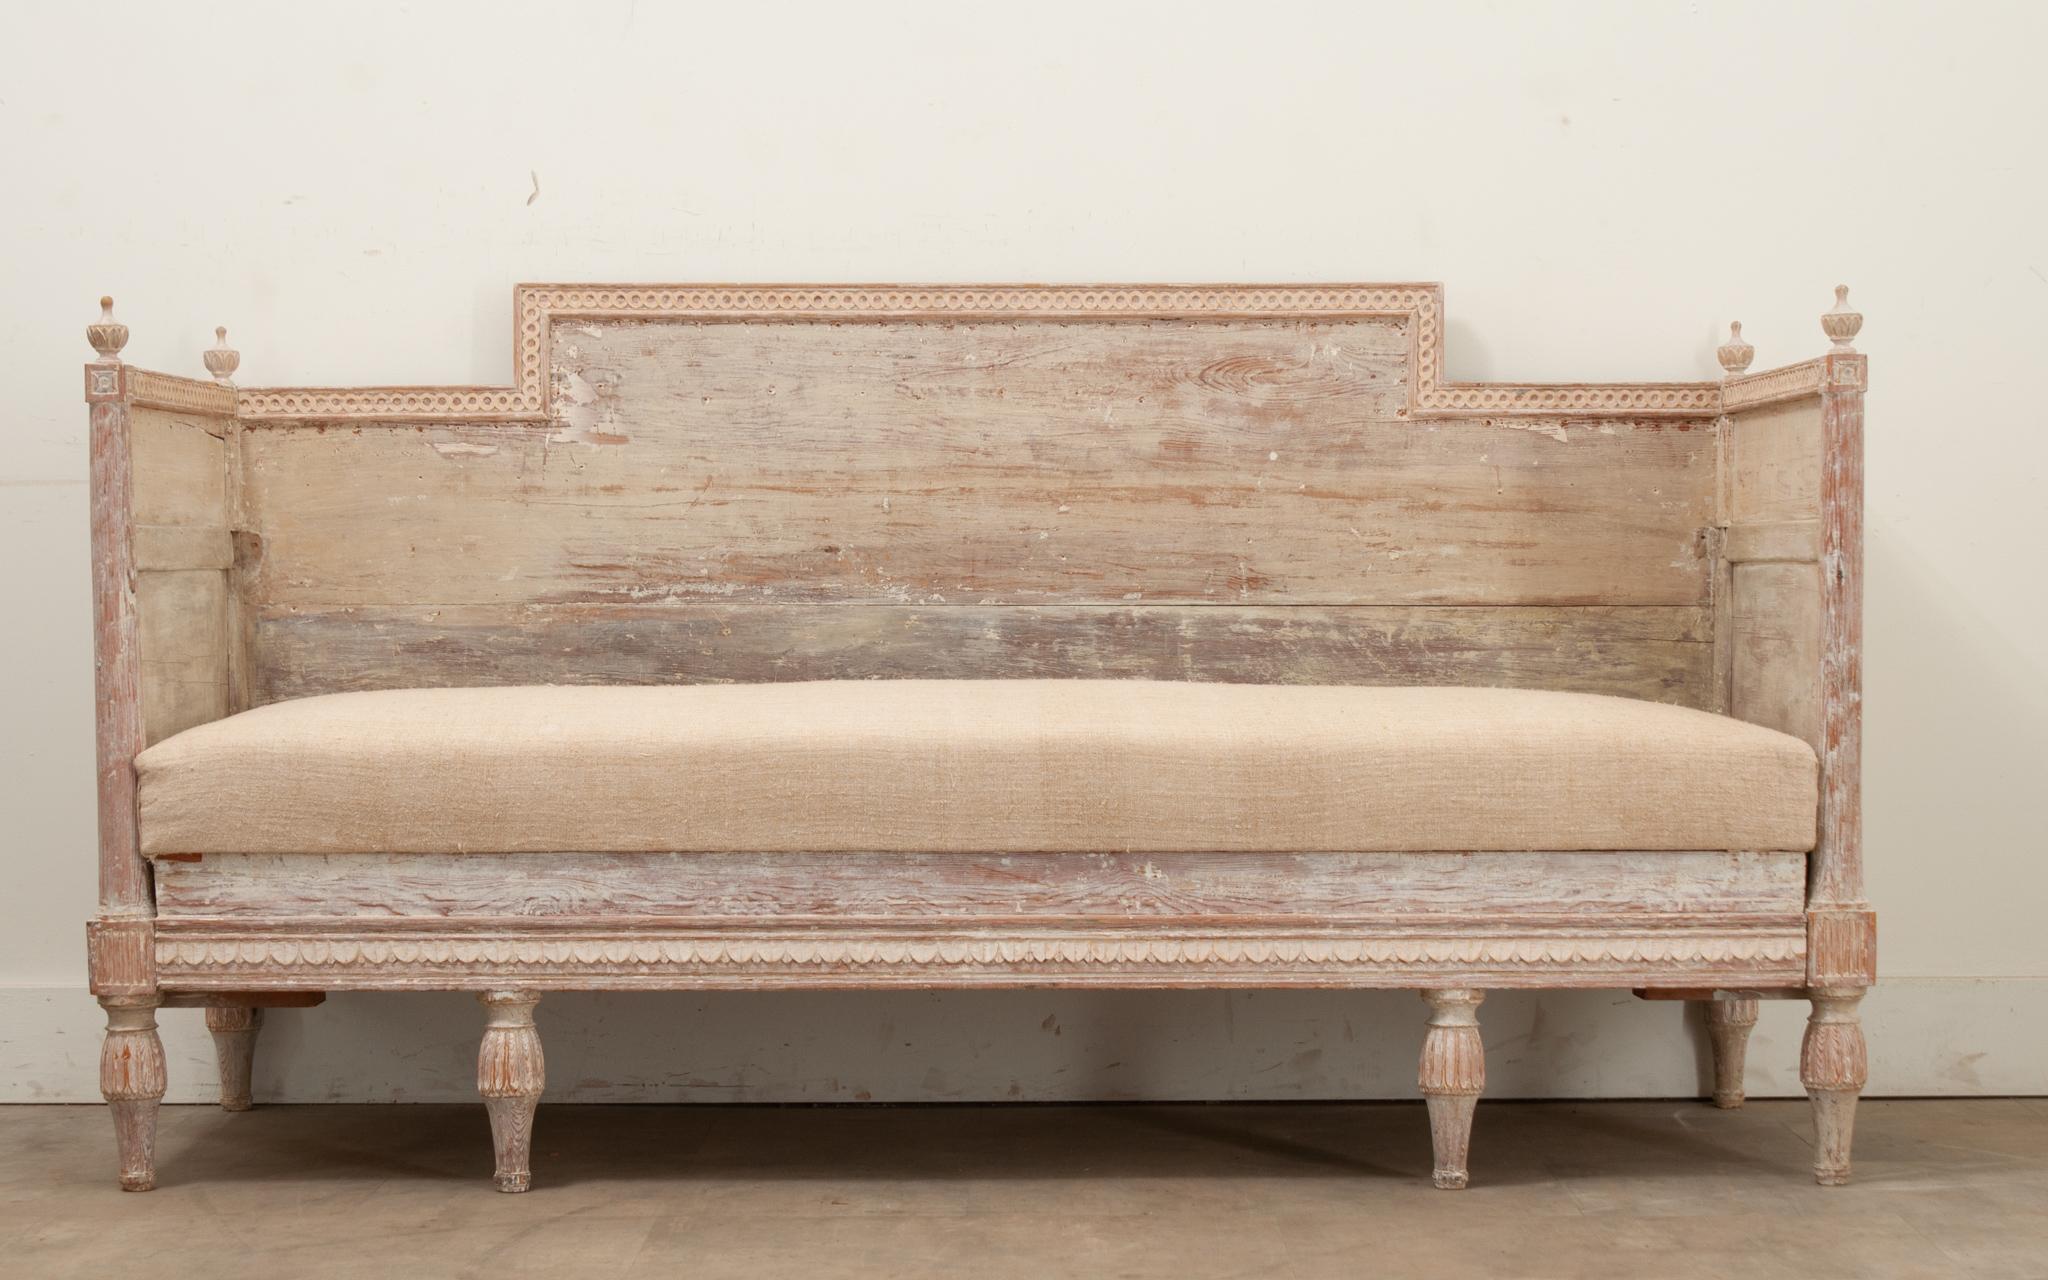 A Swedish 18th Century Period Gustavian banquette with its original hand-scraped painted finish. The solid constructed frame makes a statement and has a removable seat cushion. The legs of the banquette can slide out, converting this Swedish sofa